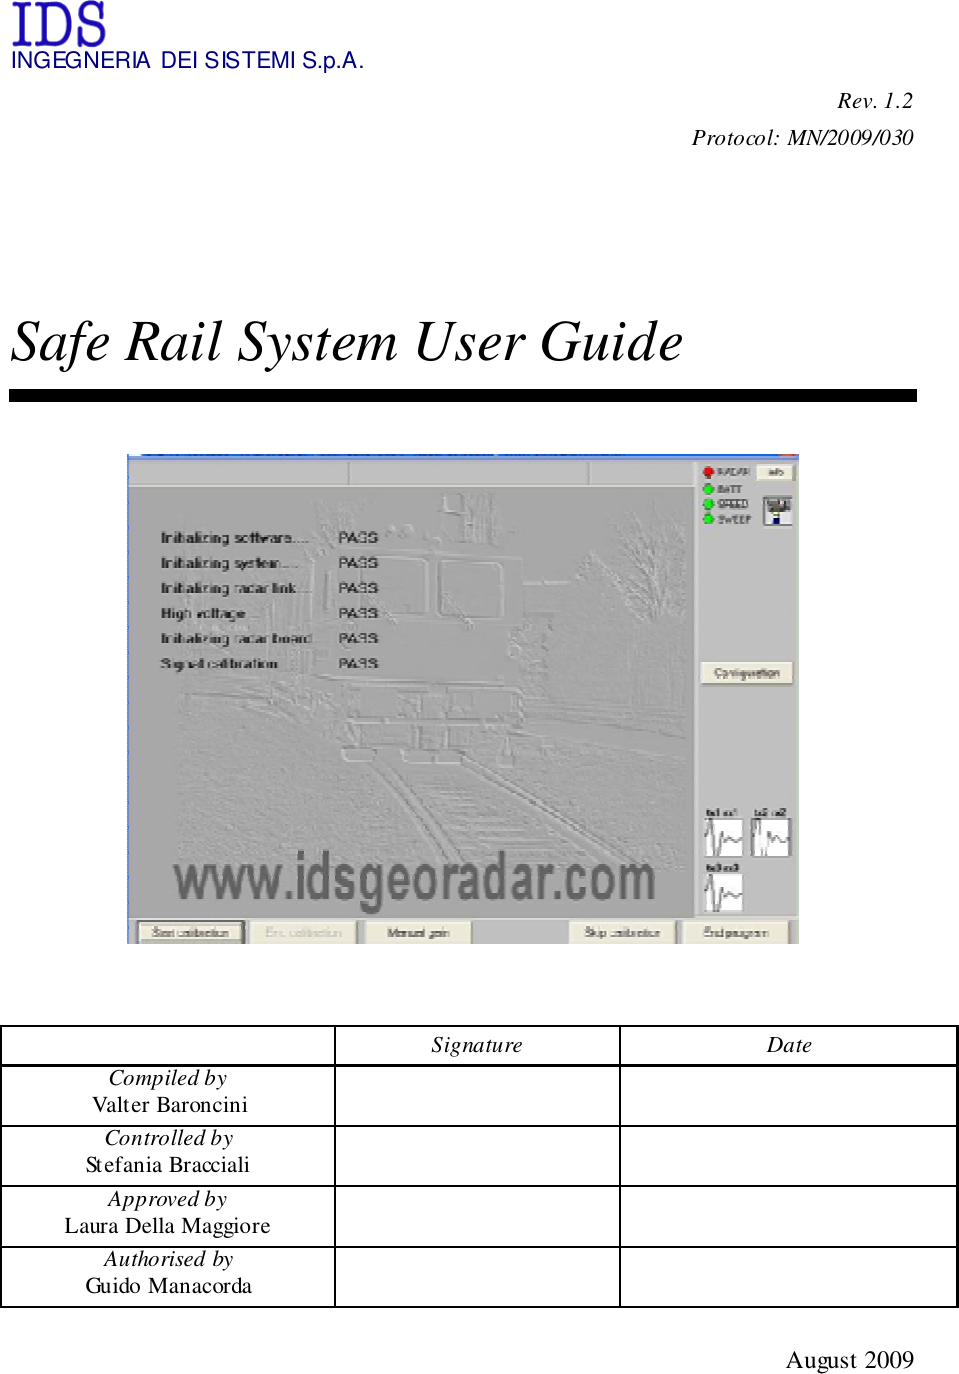  INGEGNERIA DEI SISTEMI S.p.A. Rev. 1.2 Protocol: MN/2009/030    Safe Rail System User Guide     Signature  Date Compiled by  Valter Baroncini      Controlled by Stefania Bracciali     Approved by  Laura Della Maggiore    Authorised by Guido Manacorda      August 2009  